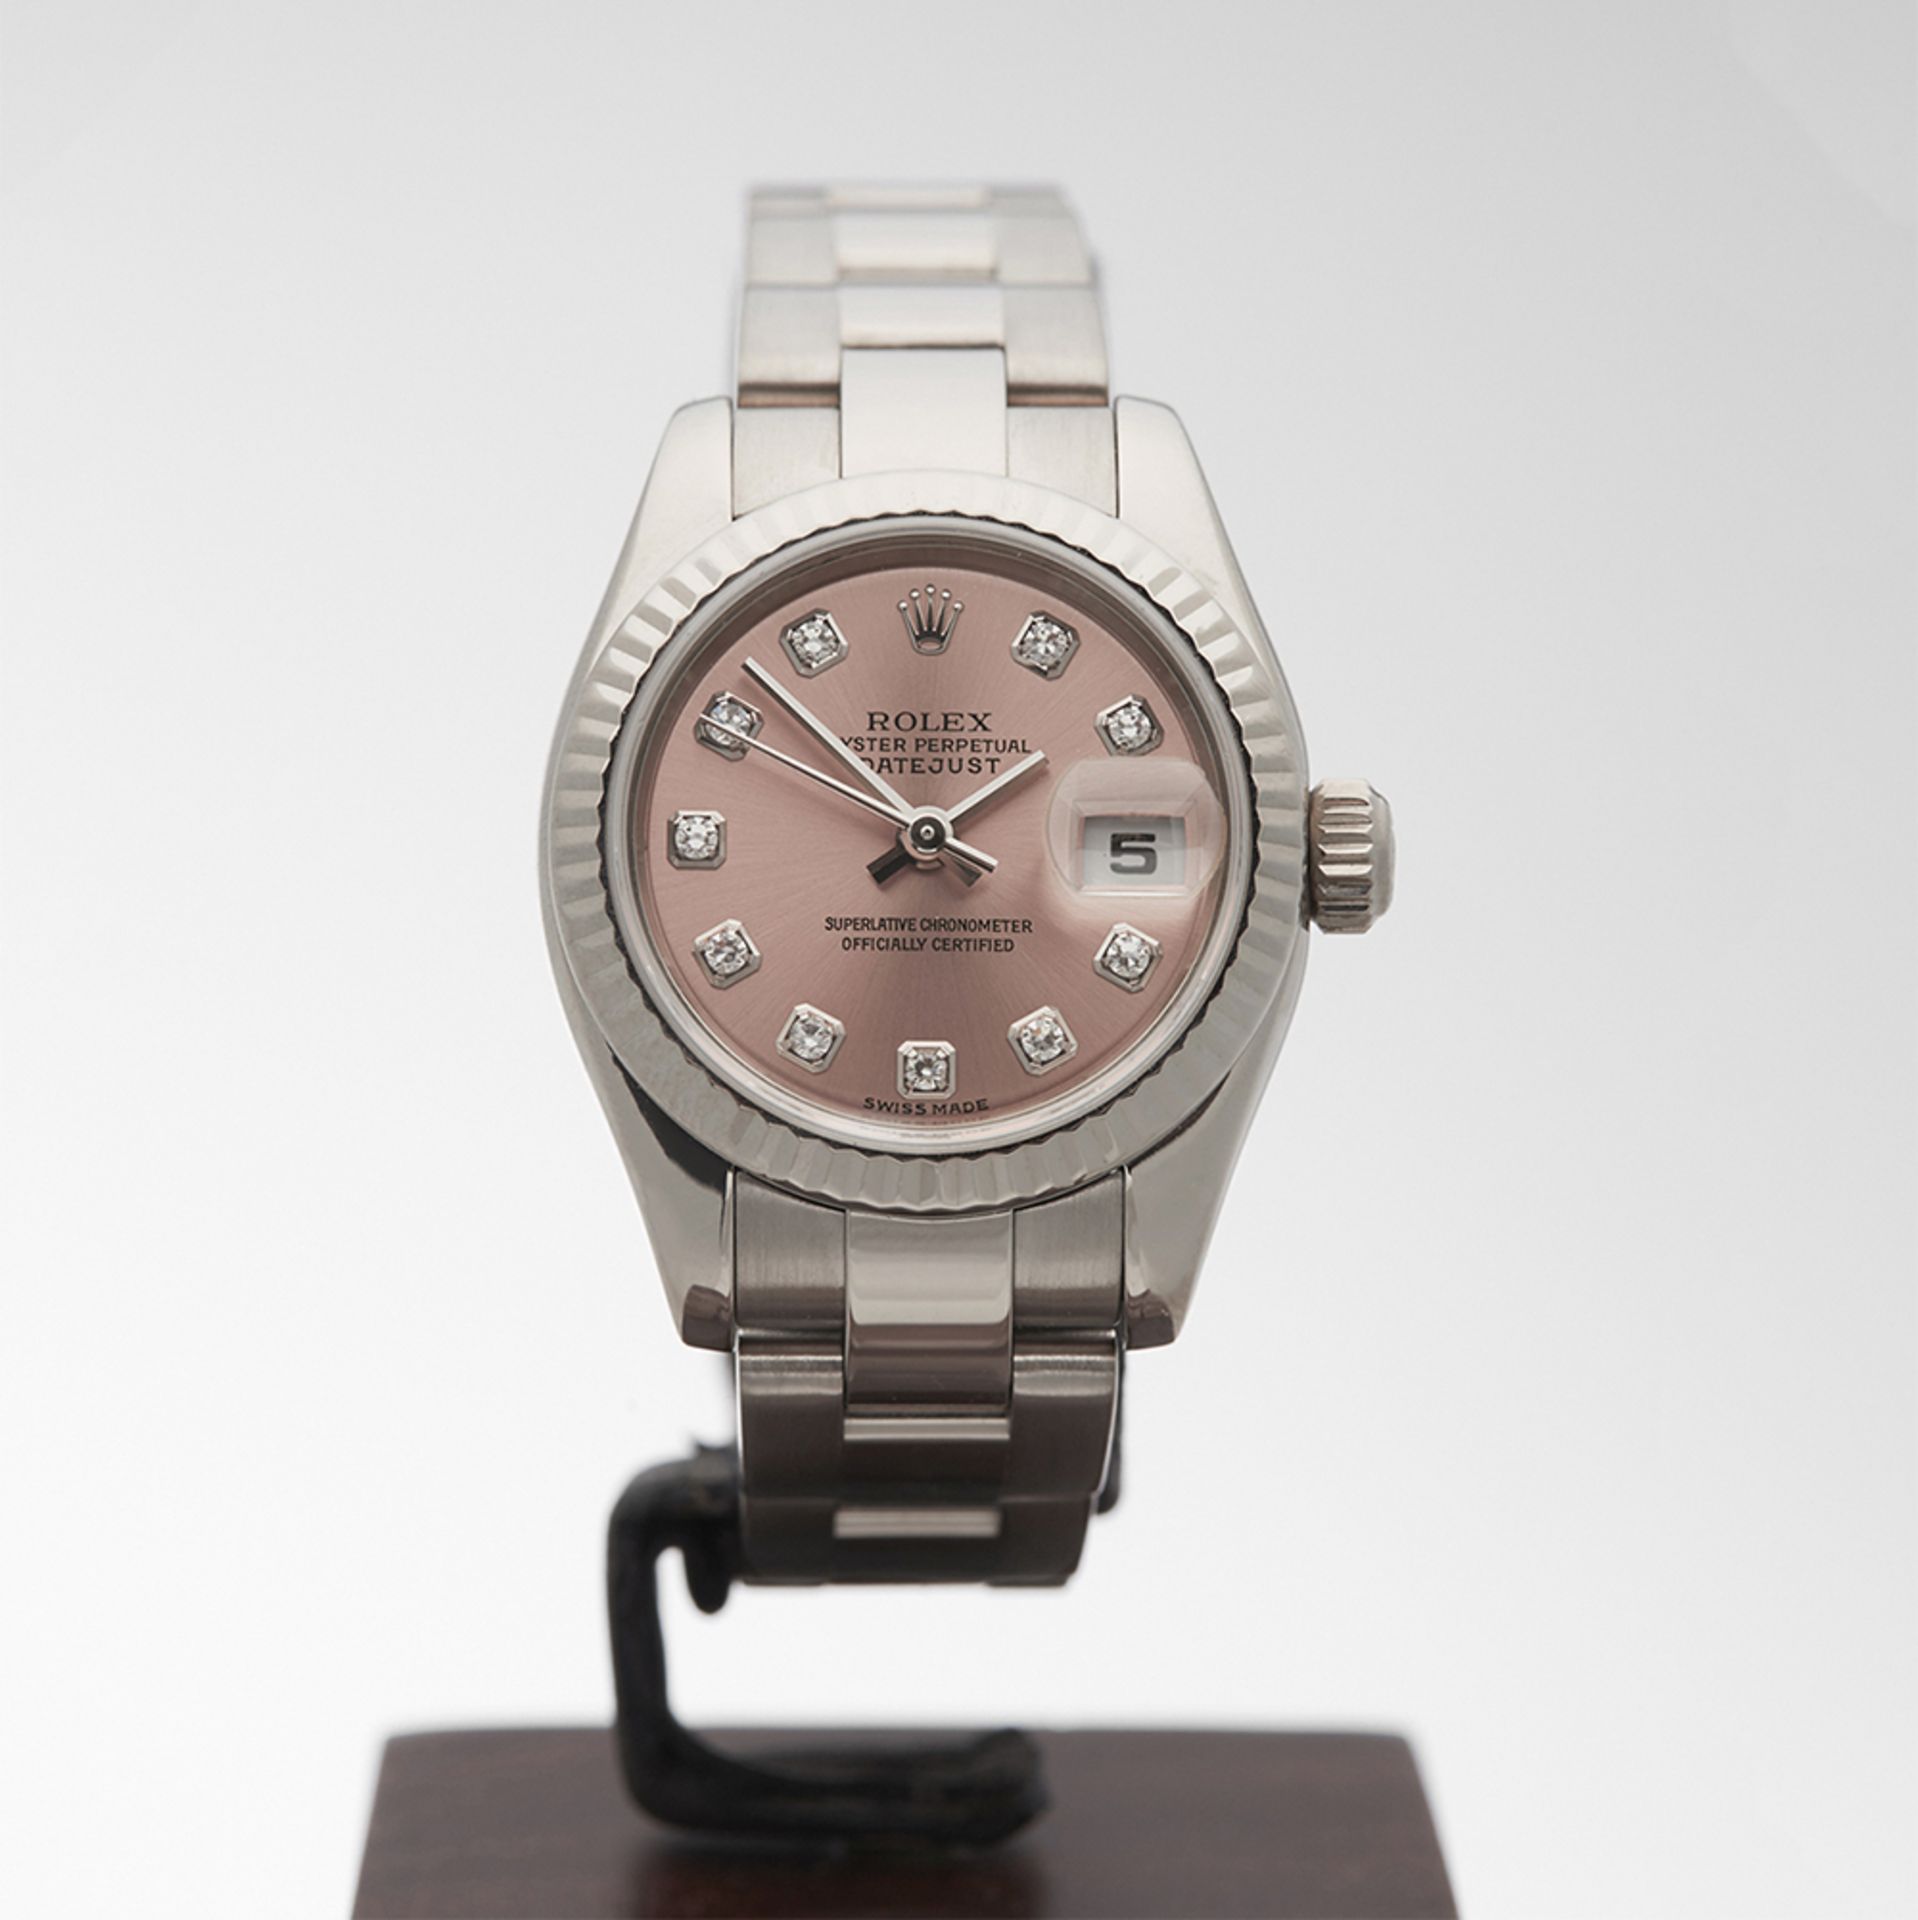 Datejust 26mm 18k White Gold - 179179 - Image 2 of 9